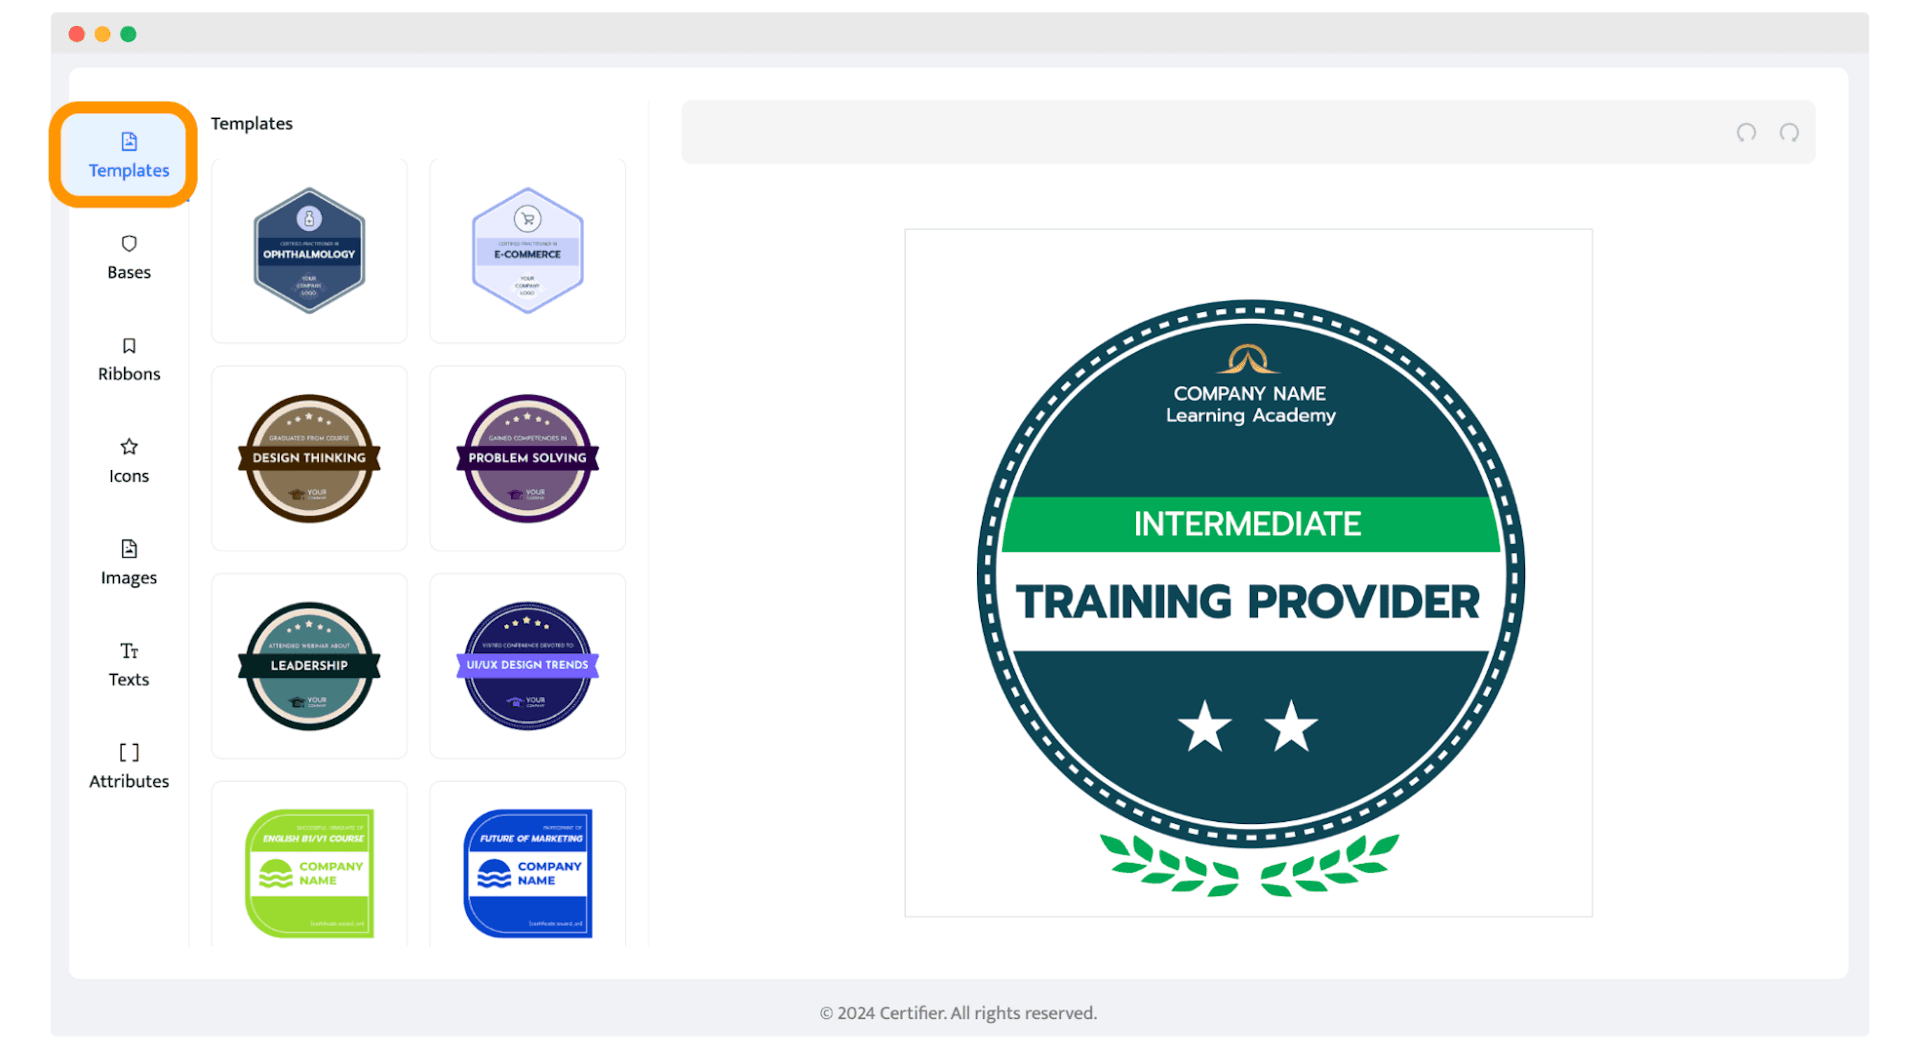 Templates tab within Certifier badge editor.